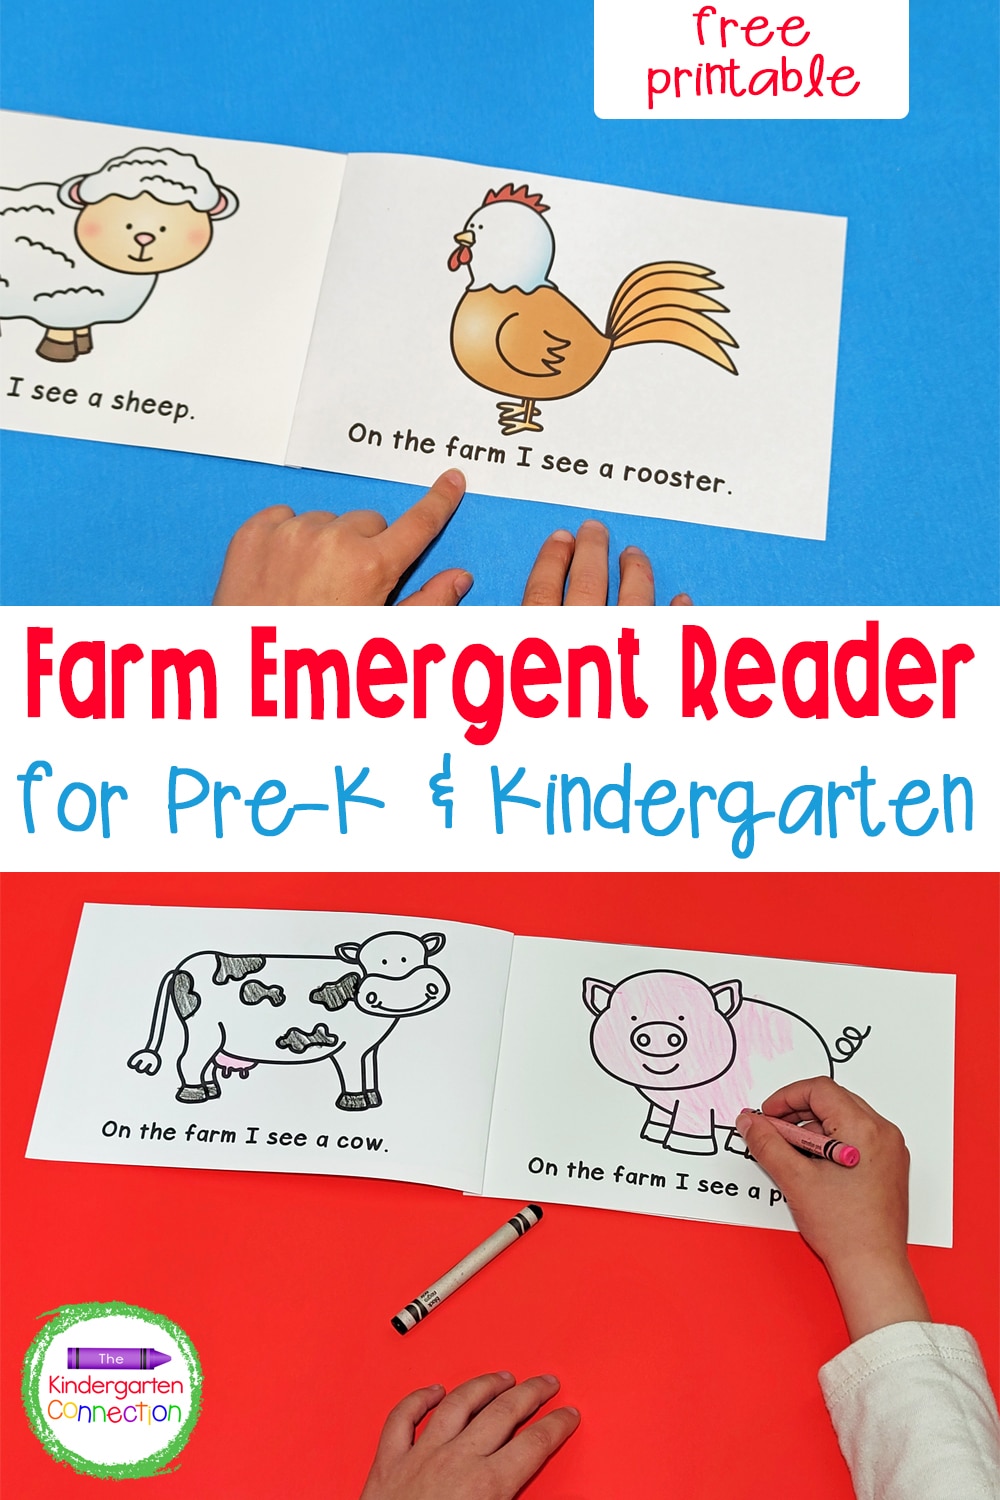 If you are learning about farms and farm animals, this free Farm Emergent Reader for kids is the perfect addition to your plans!